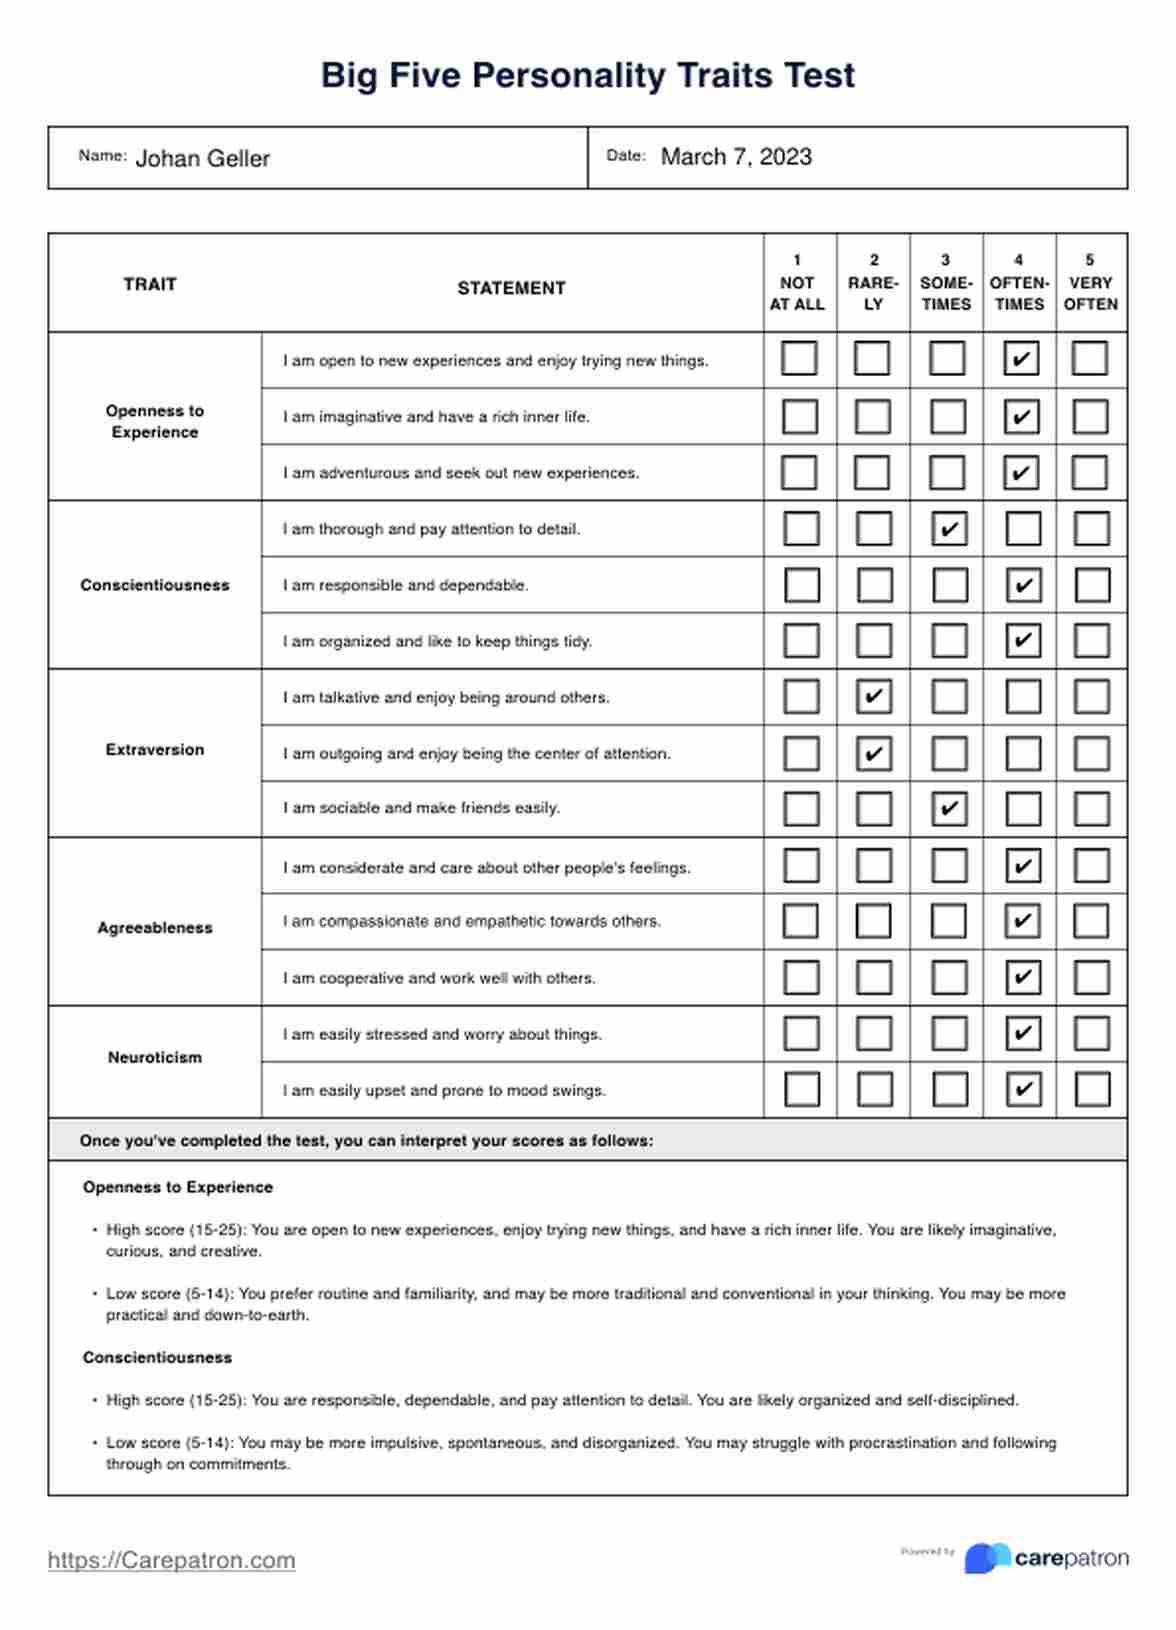 Big 5 Personality Test PDF Example